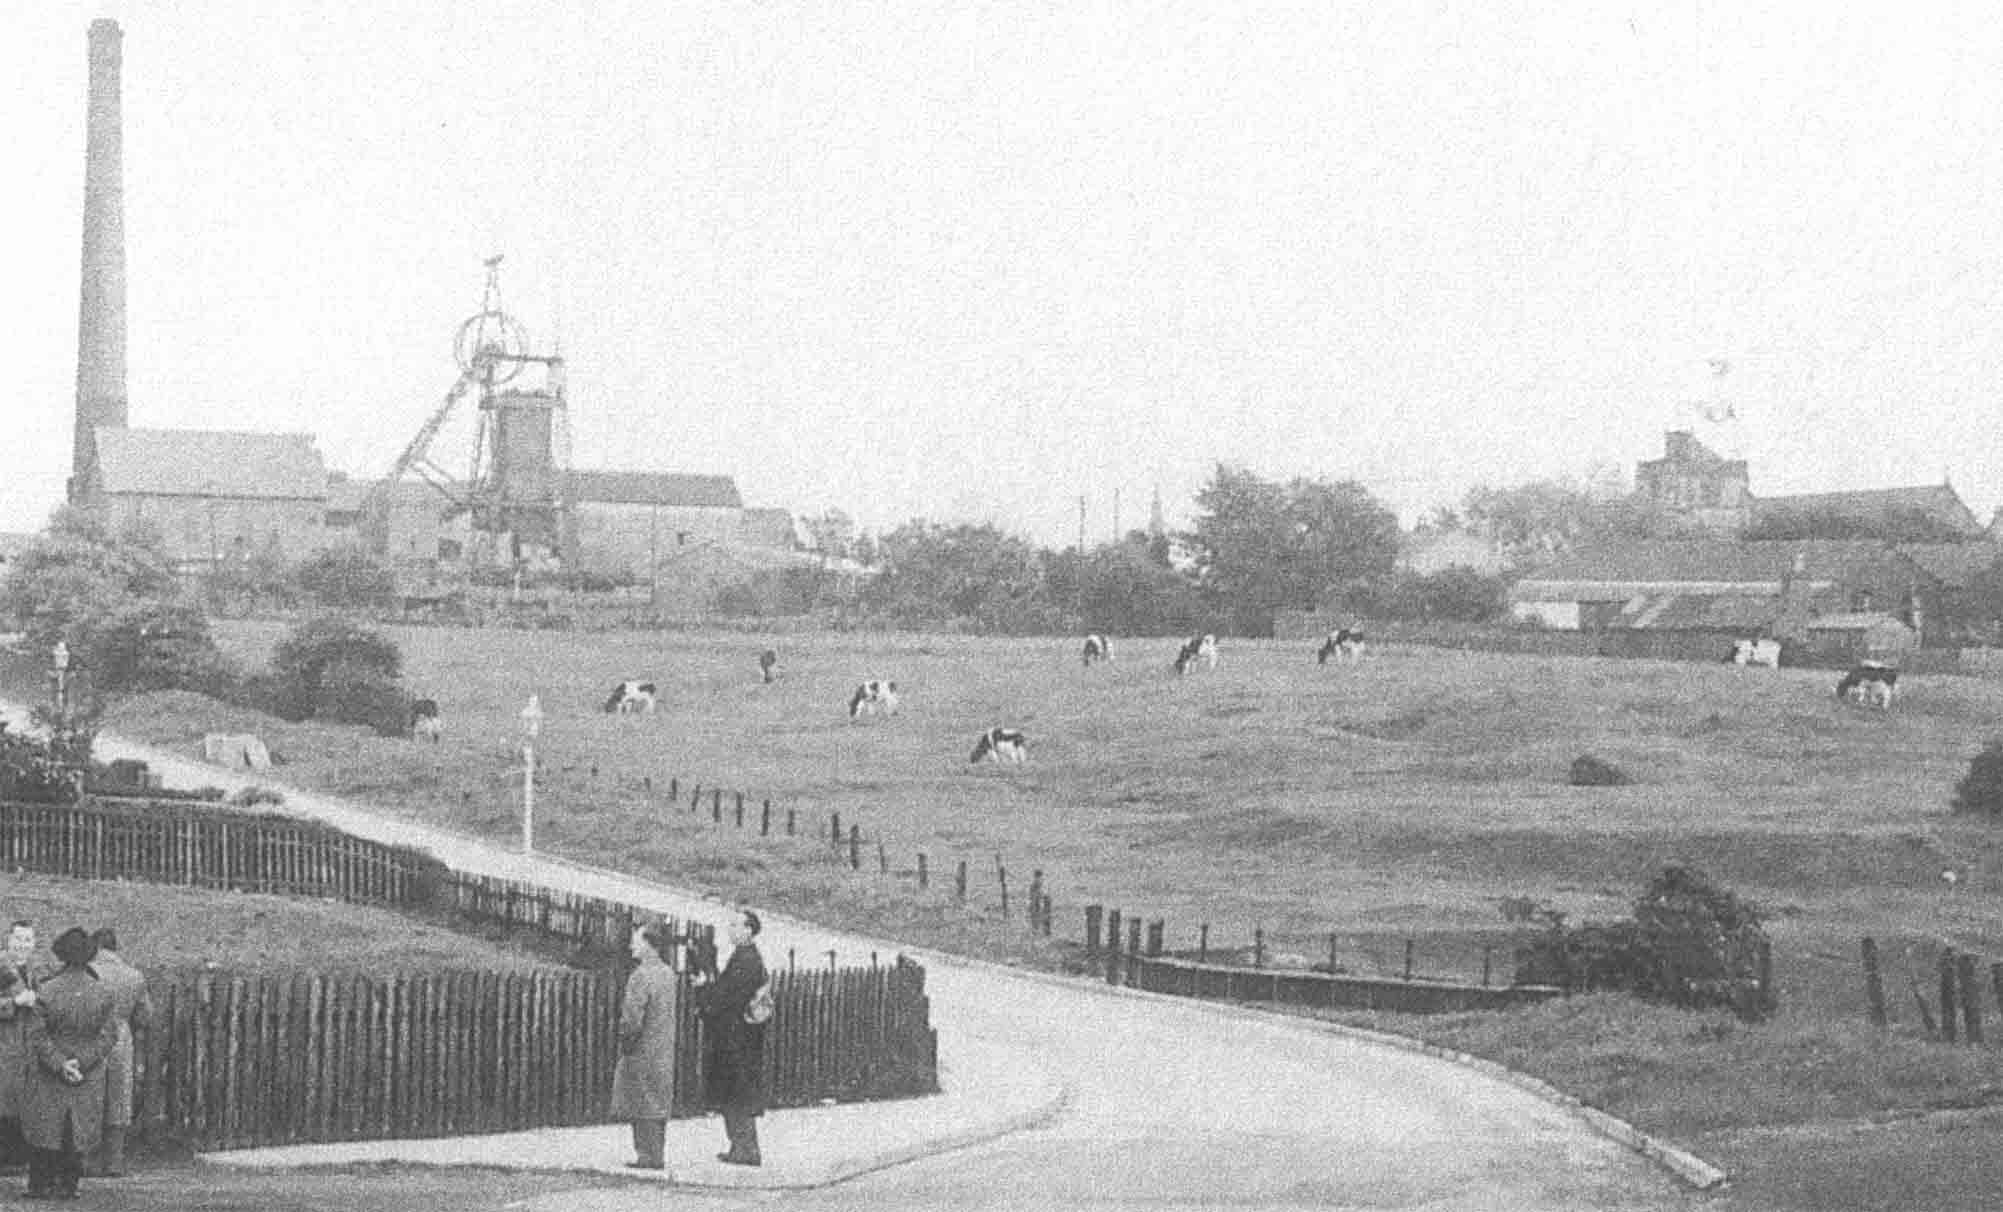 A grainy view towards the upcast Chanters No2. headgear from Tyldesley Old Road near Chanters Bridge c.1955. Just to the right is Hindsford St Anne parish church. And to prove that Atherton was not entirely wall-to-wall brick and cinders, the black & white objects in the middle distance are cows, grazing peacefully on slightly sooty grass. Photo by courtesy of Alan Davies